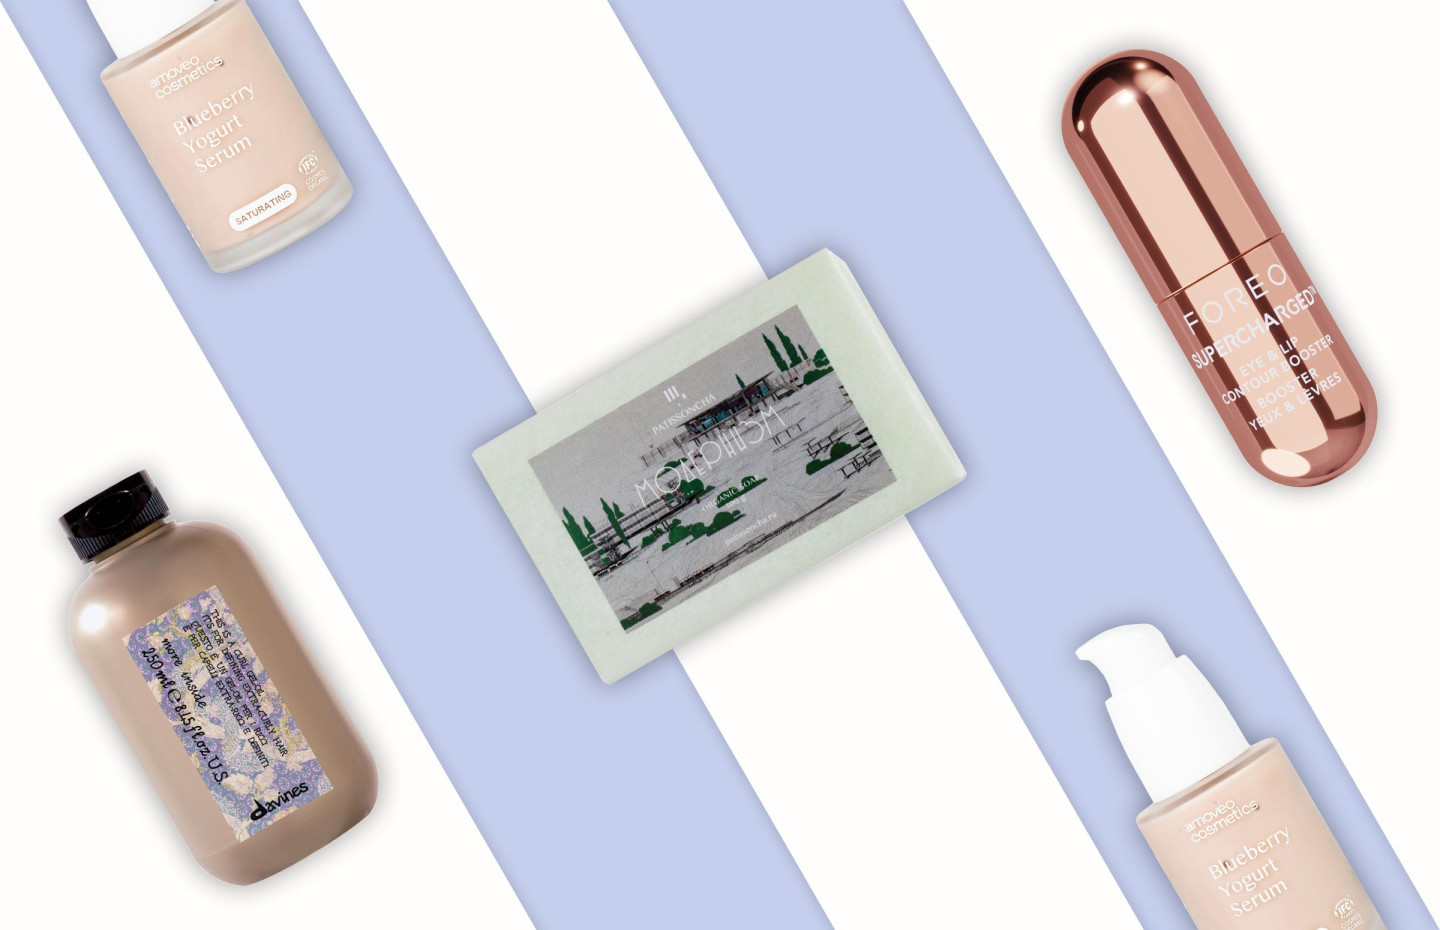 Soap “Modernism”, body cream “Mantra” and other beauty news of the week